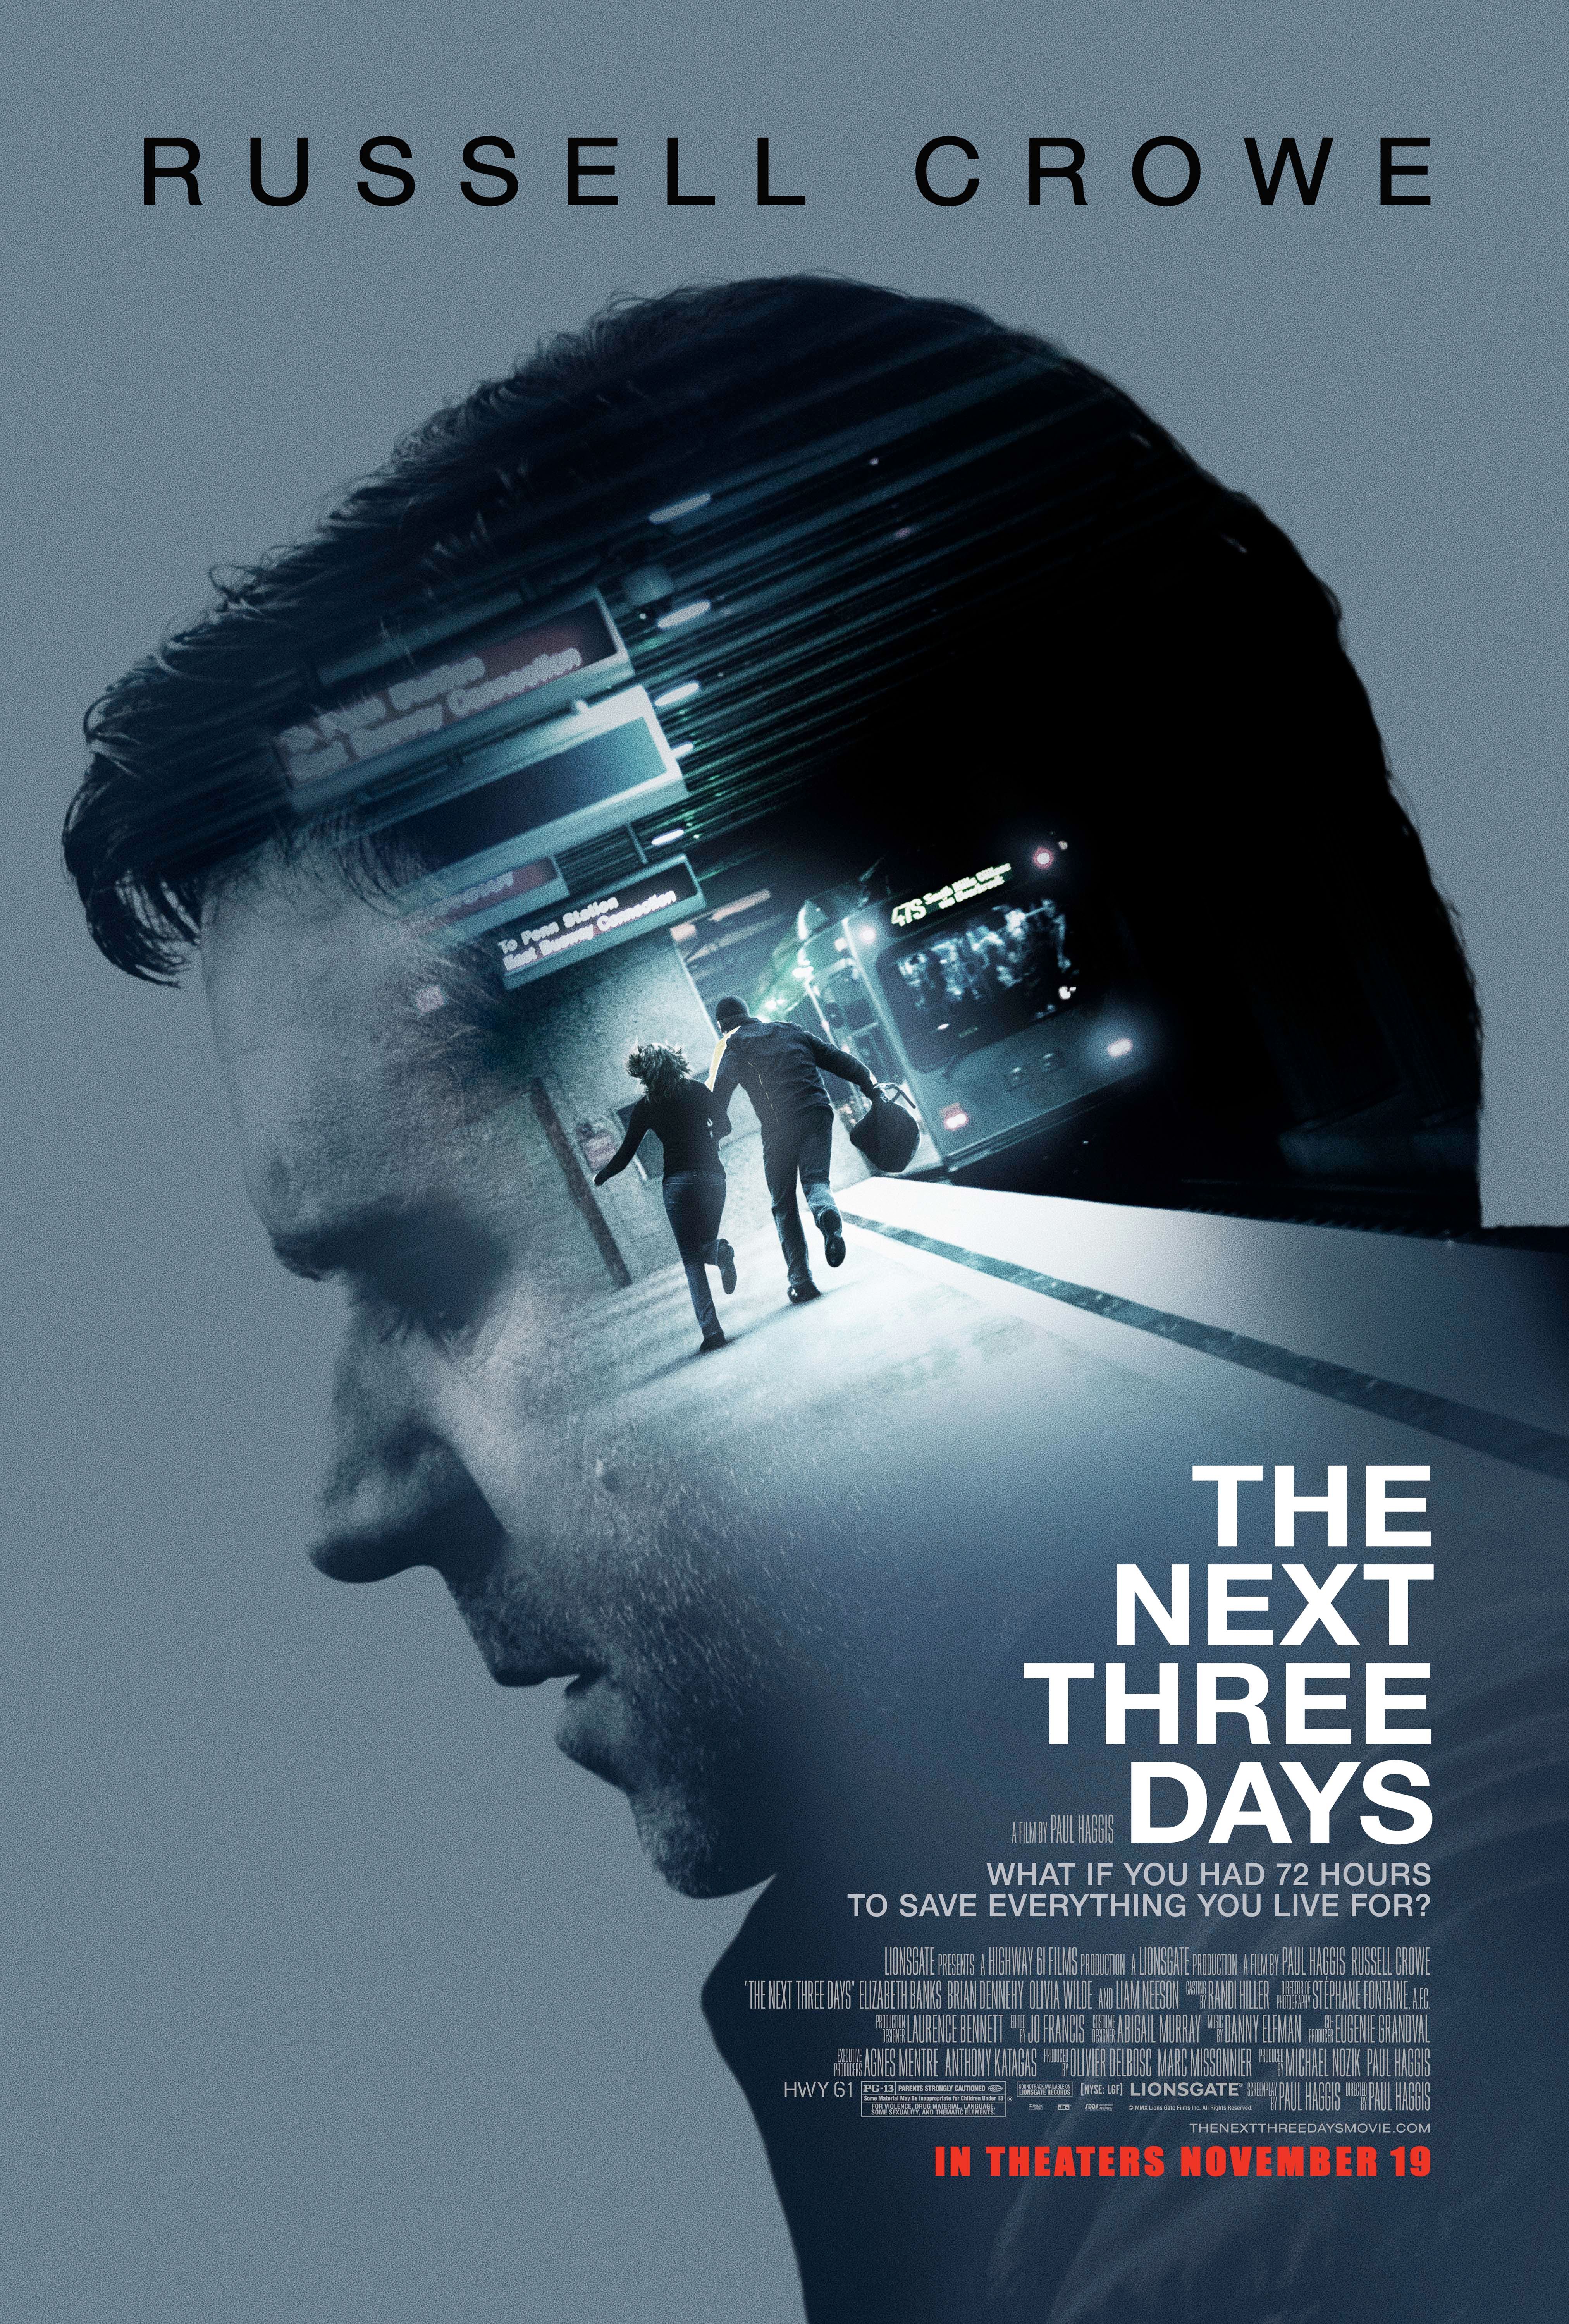 Exclusive: The Next Three Days Poster